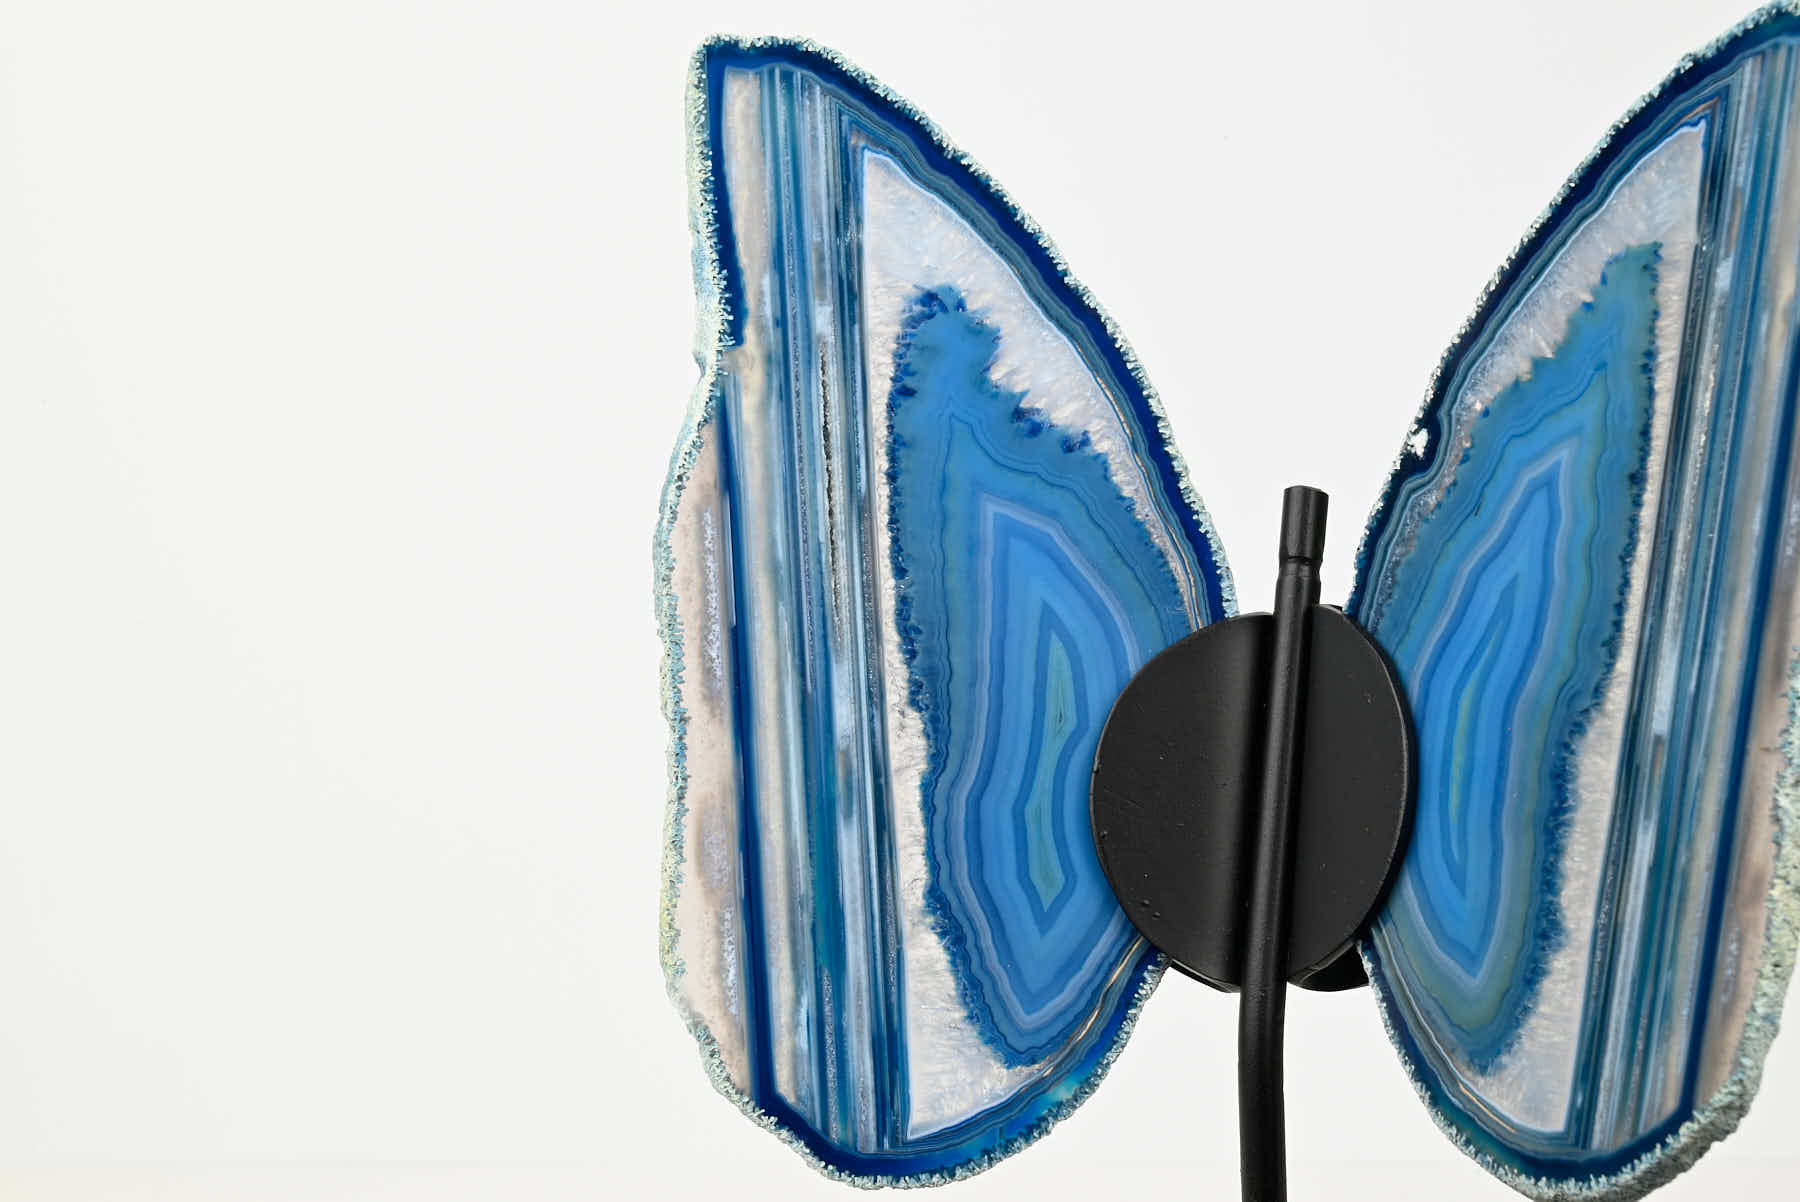 Blue Agate Butterfly on Stand - 0.56kg and 21cm Tall - #BUBLUE-10014